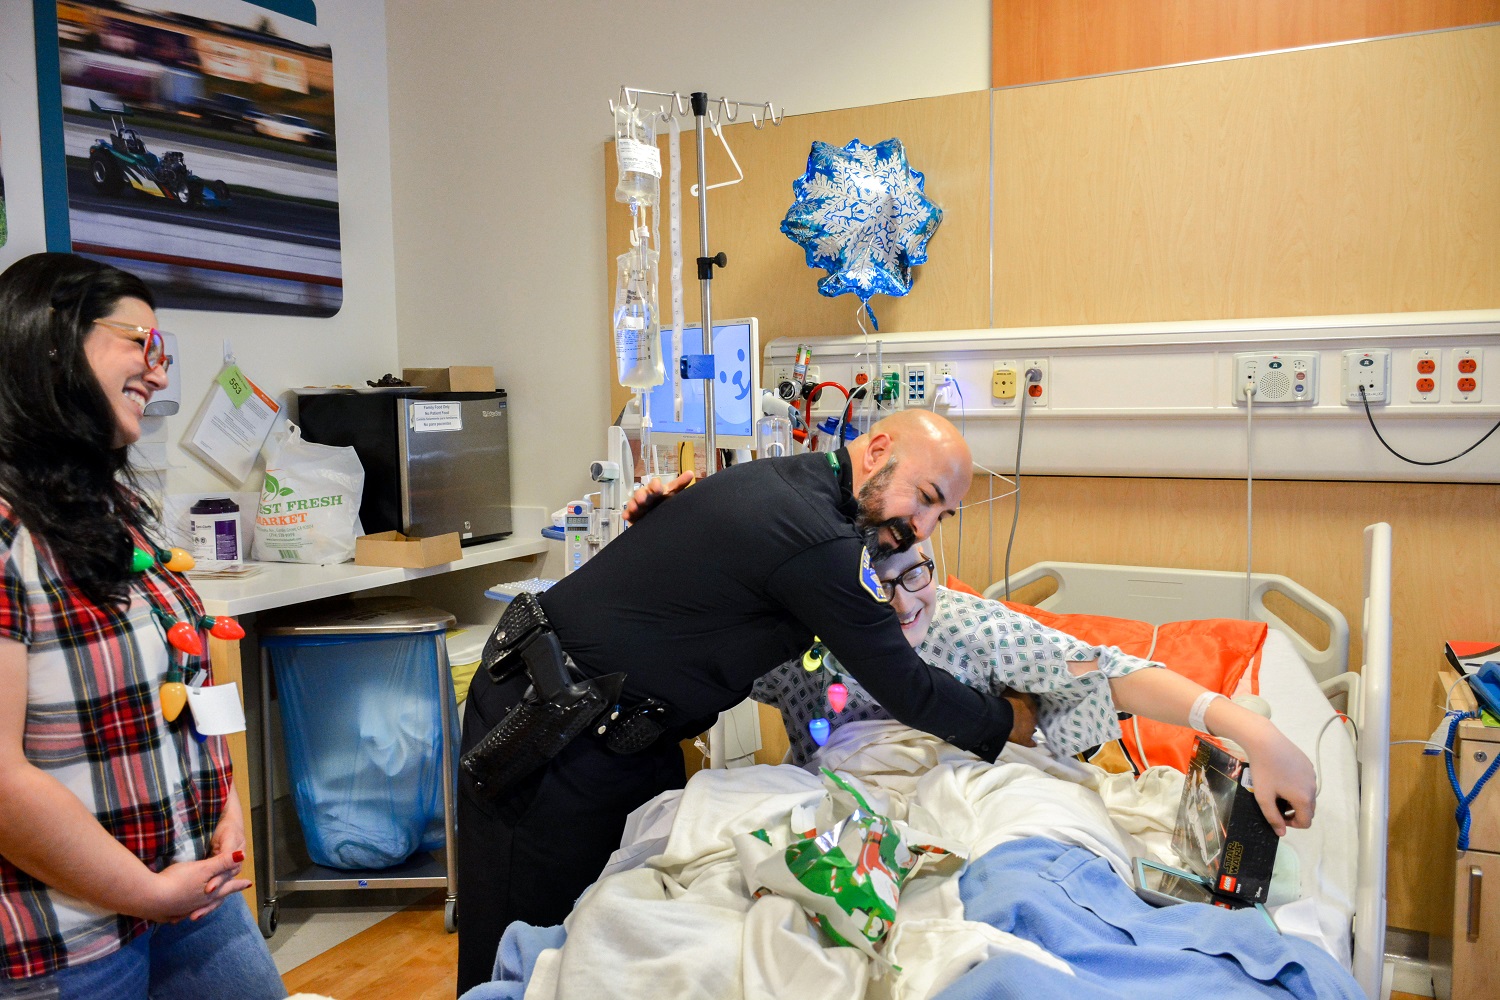 A police officer hugging a child in a hospital bed, both are smiling